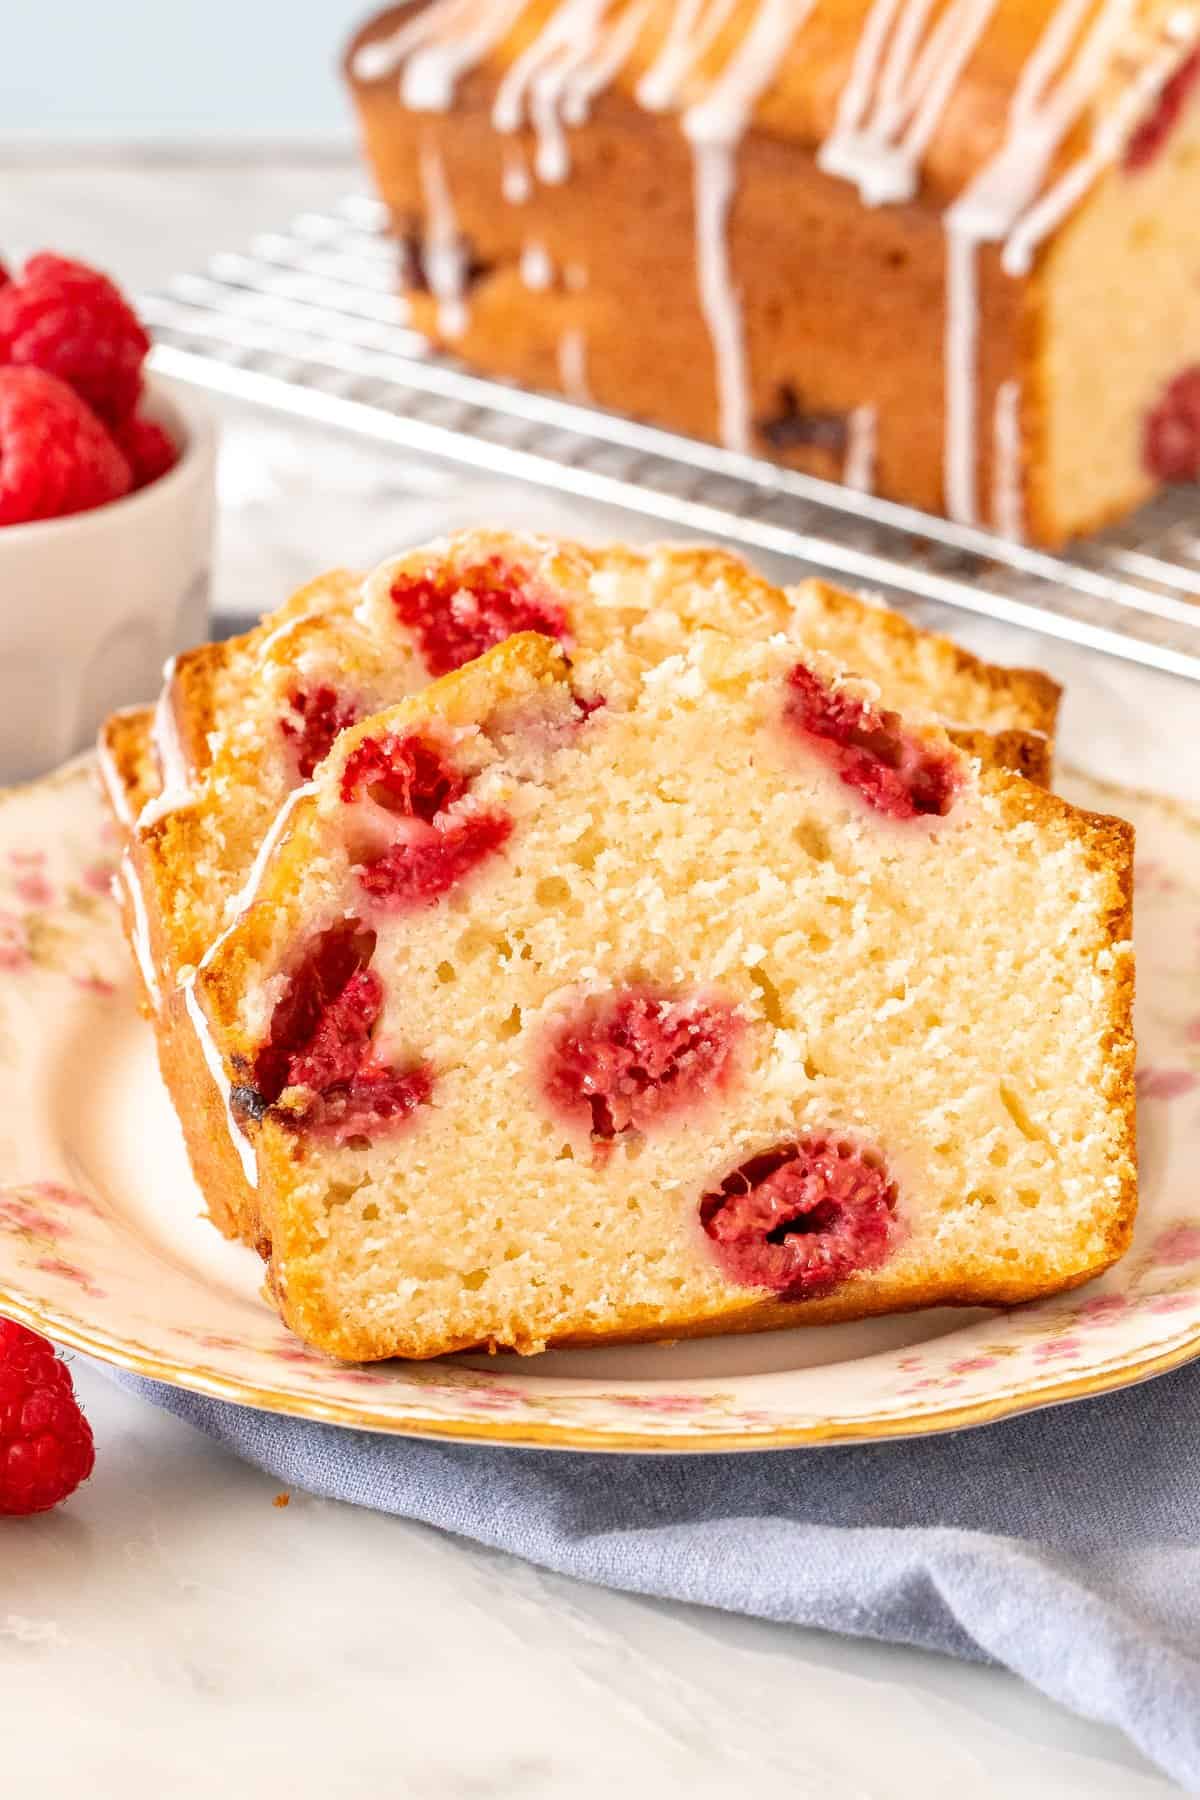 Slices of moist raspberry bread on a plate